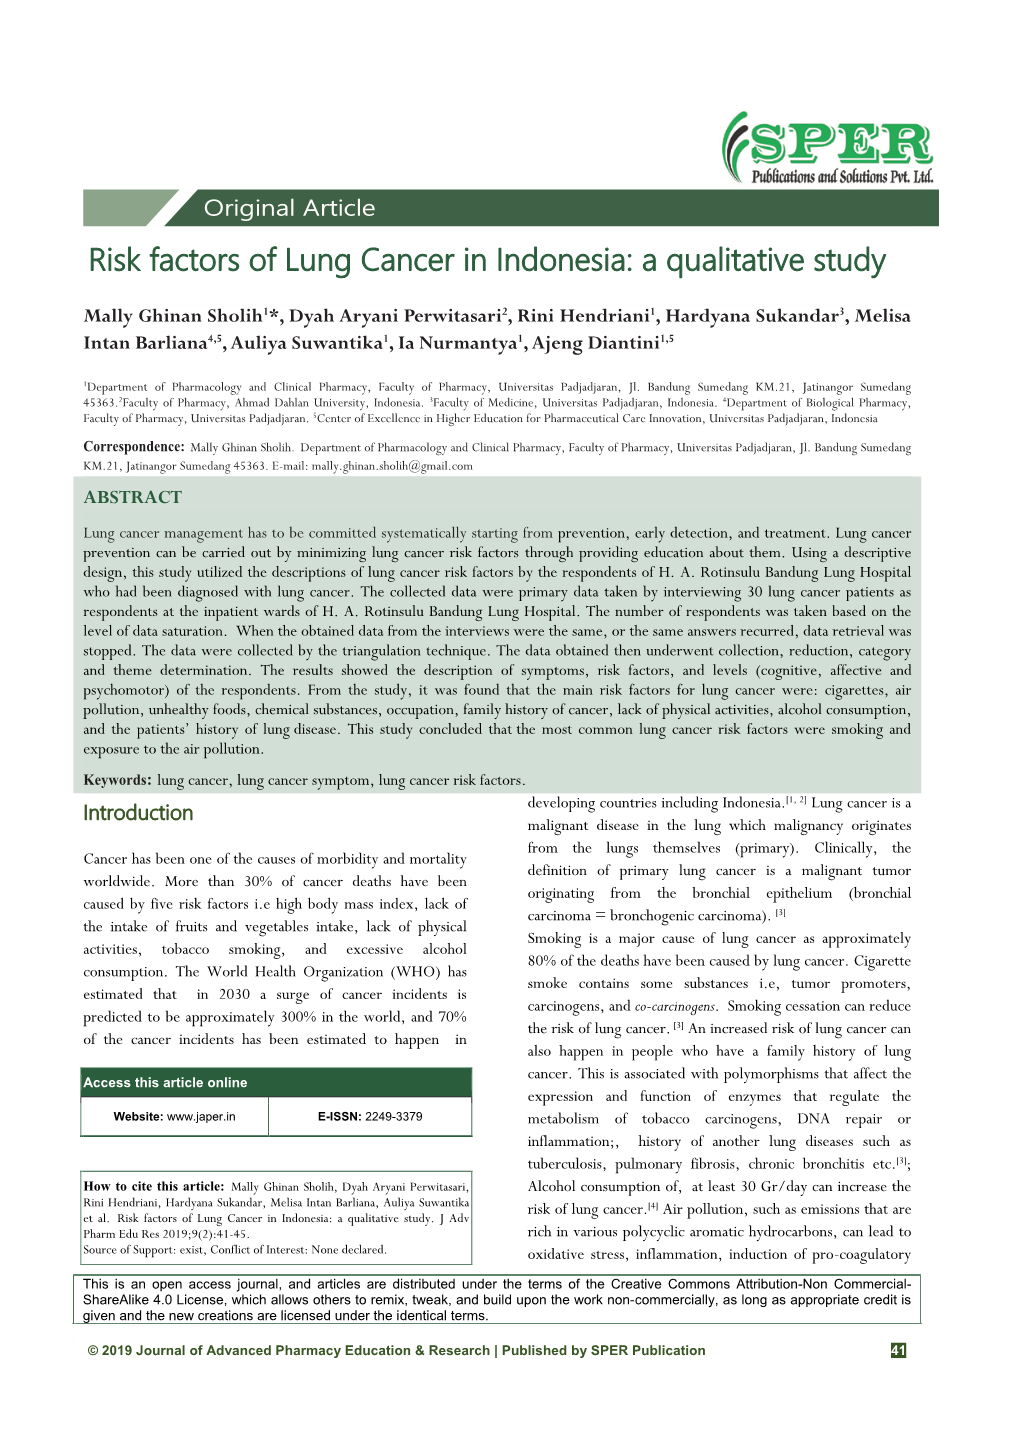 Risk Factors of Lung Cancer in Indonesia: a Qualitative Study